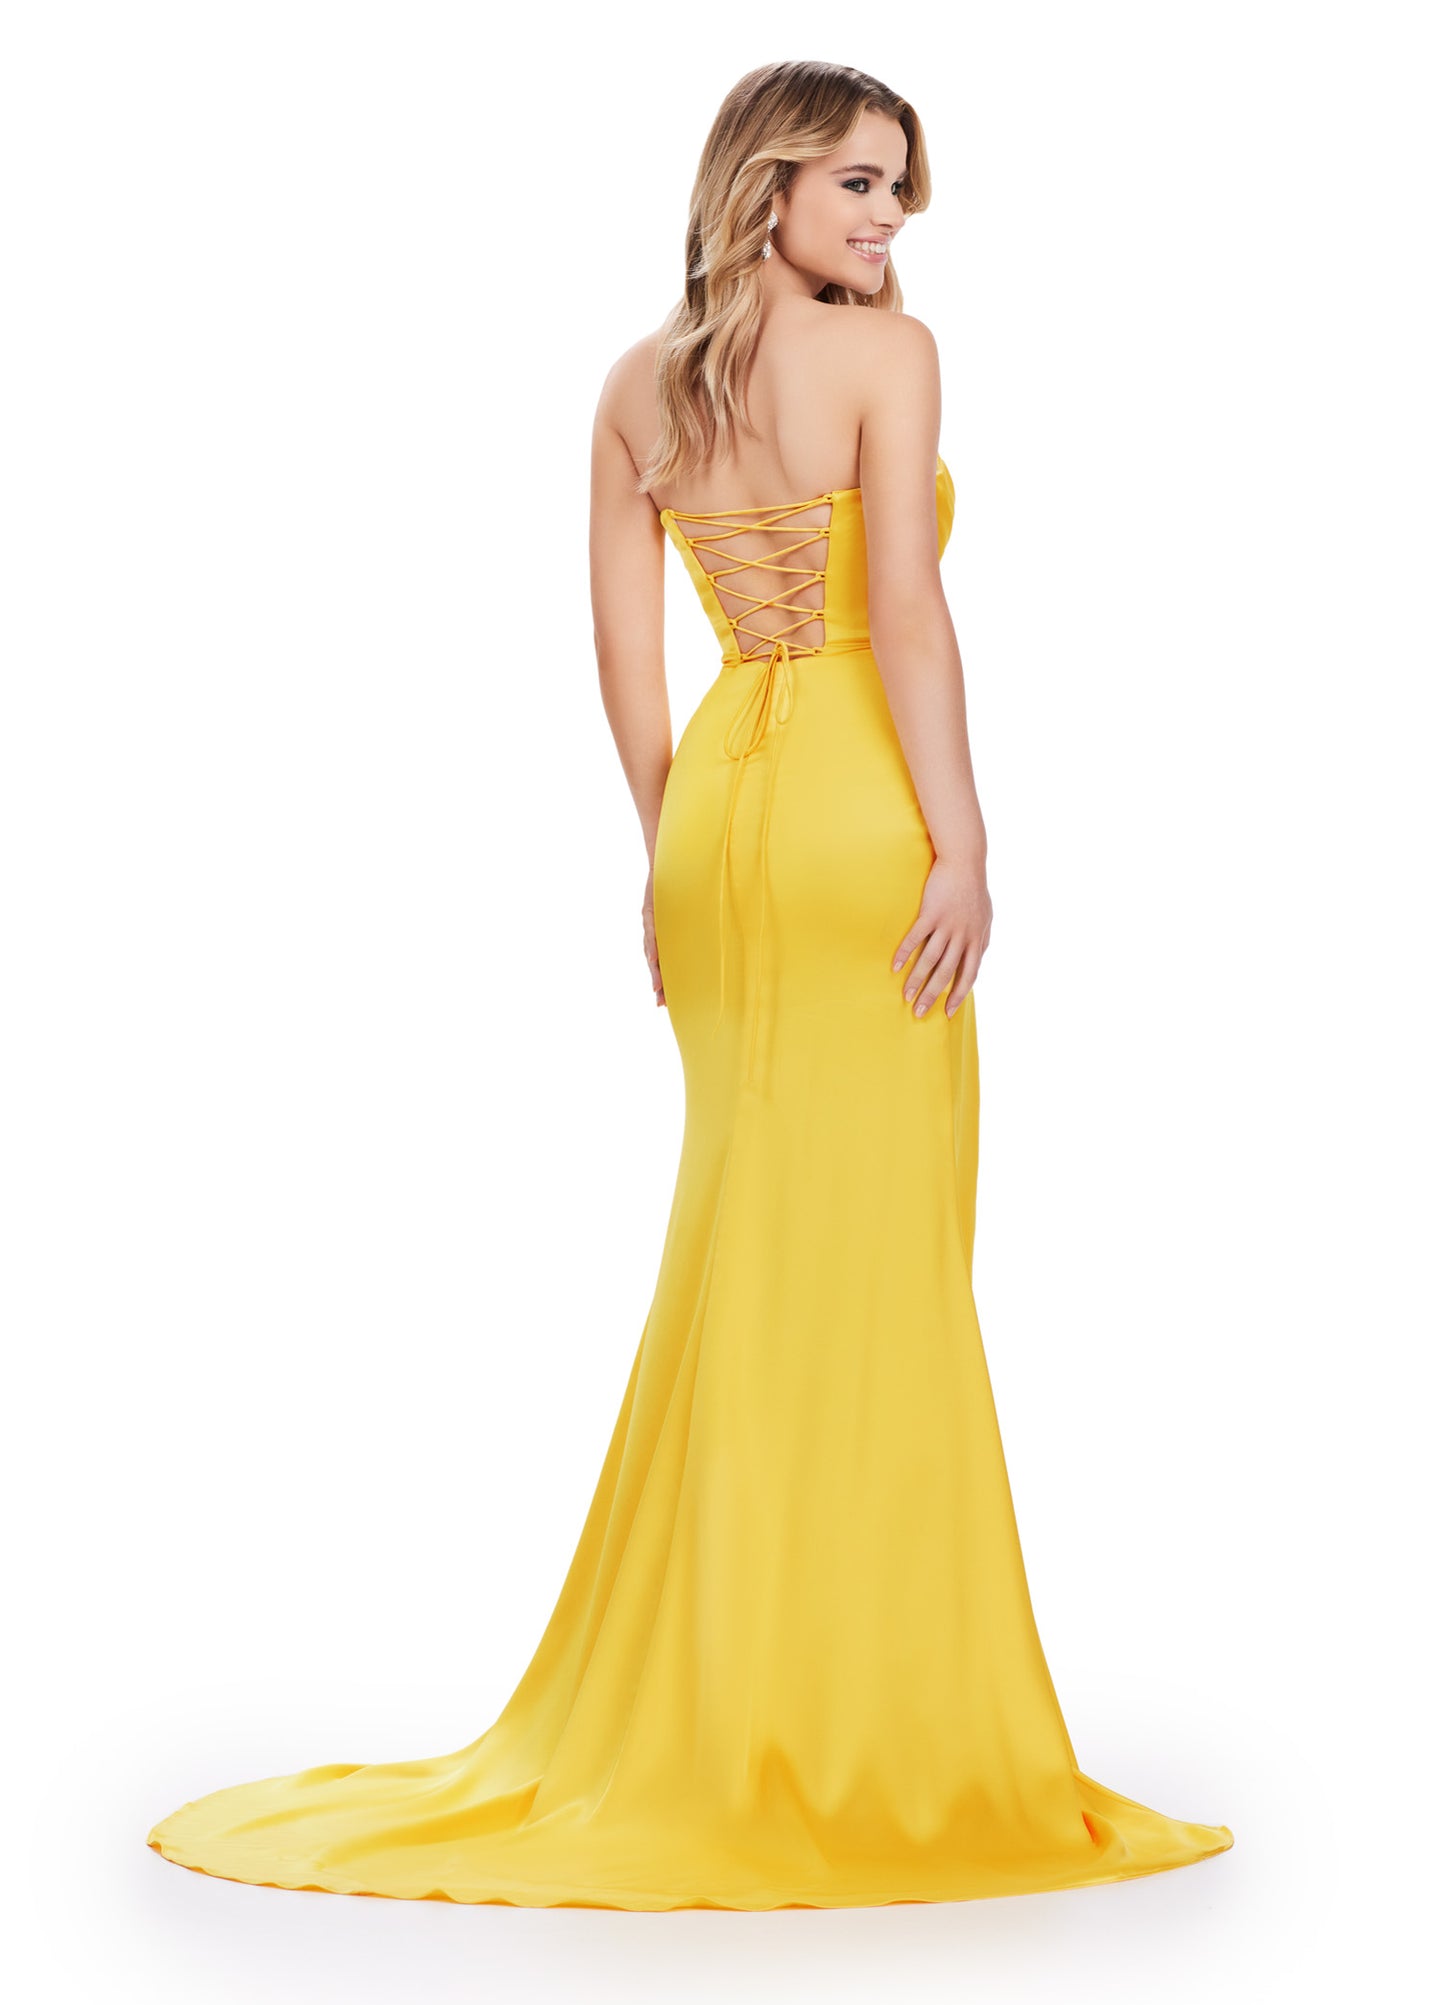 Get ready to make a statement in the Ashley Lauren 11605 Long Prom Dress. This stunning gown features a strapless sweetheart neckline and a satin material that will hug your curves in all the right places. The lace-up back and thigh-high slit add a touch of drama and sophistication. Stand out at your next formal event with this elegant and stylish prom dress. A timeless classic! This strapless satin dress features ruched detail throughout. The lace up back and right leg slit complete the look.